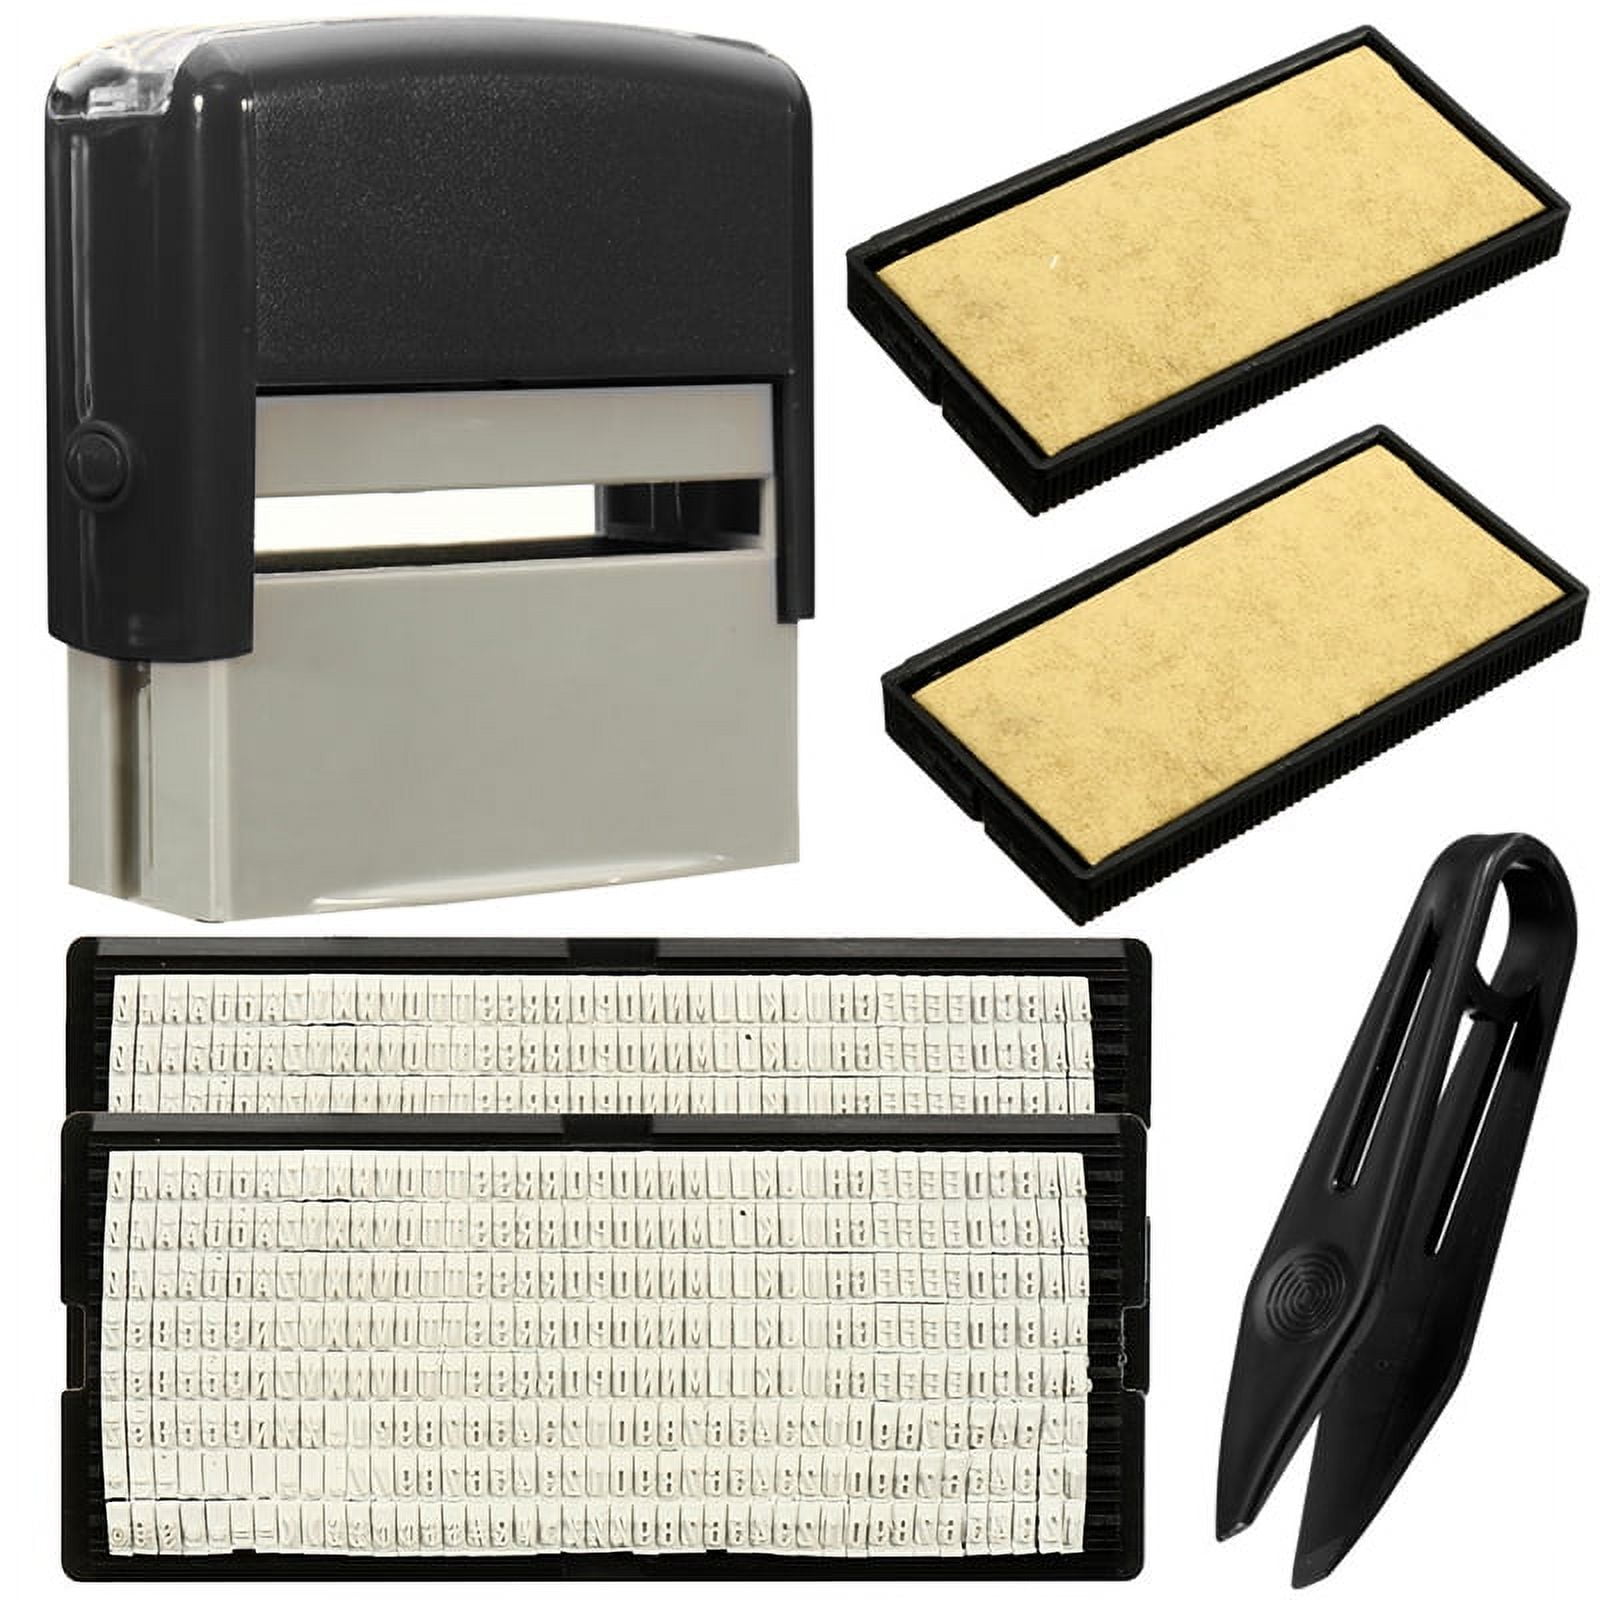 Custom Business Title Stamp  Self-Inking Personalized Stamps